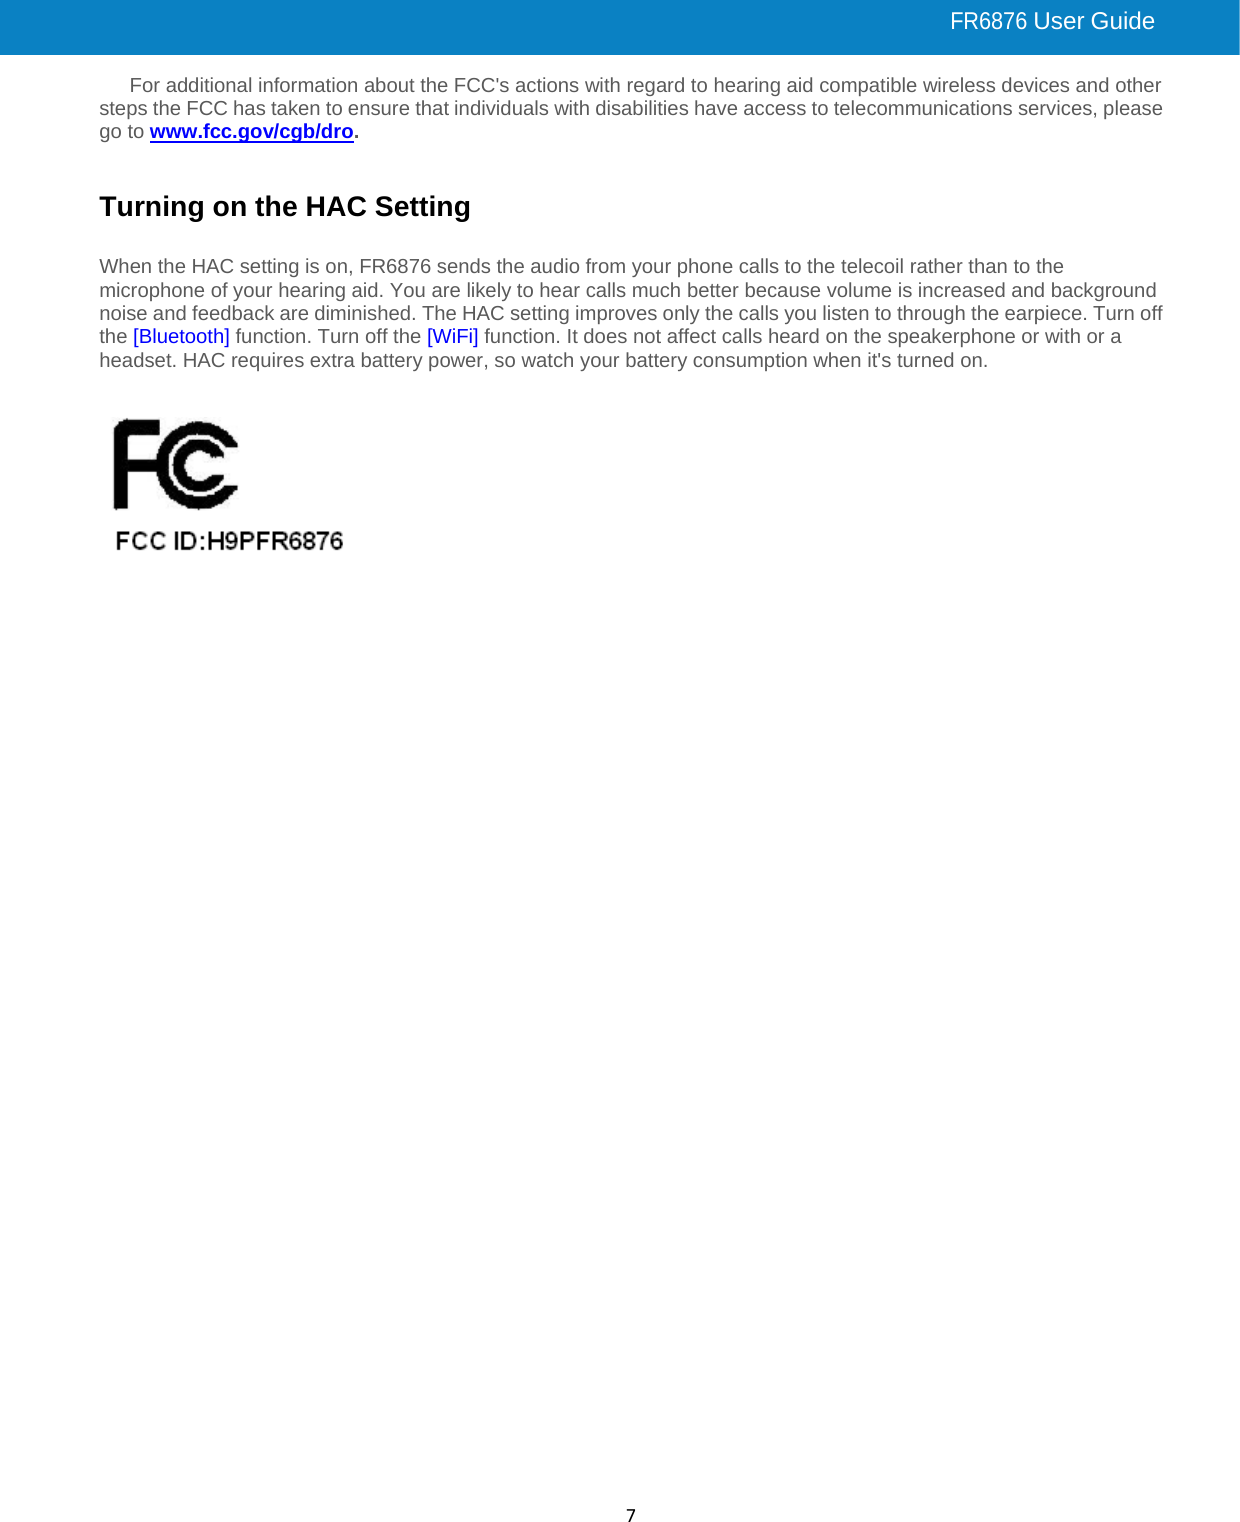  FR6876 User Guide 7For additional information about the FCC&apos;s actions with regard to hearing aid compatible wireless devices and other steps the FCC has taken to ensure that individuals with disabilities have access to telecommunications services, please go to www.fcc.gov/cgb/dro.   Turning on the HAC Setting  When the HAC setting is on, FR6876 sends the audio from your phone calls to the telecoil rather than to the microphone of your hearing aid. You are likely to hear calls much better because volume is increased and background noise and feedback are diminished. The HAC setting improves only the calls you listen to through the earpiece. Turn off the [Bluetooth] function. Turn off the [WiFi] function. It does not affect calls heard on the speakerphone or with or a headset. HAC requires extra battery power, so watch your battery consumption when it&apos;s turned on.            